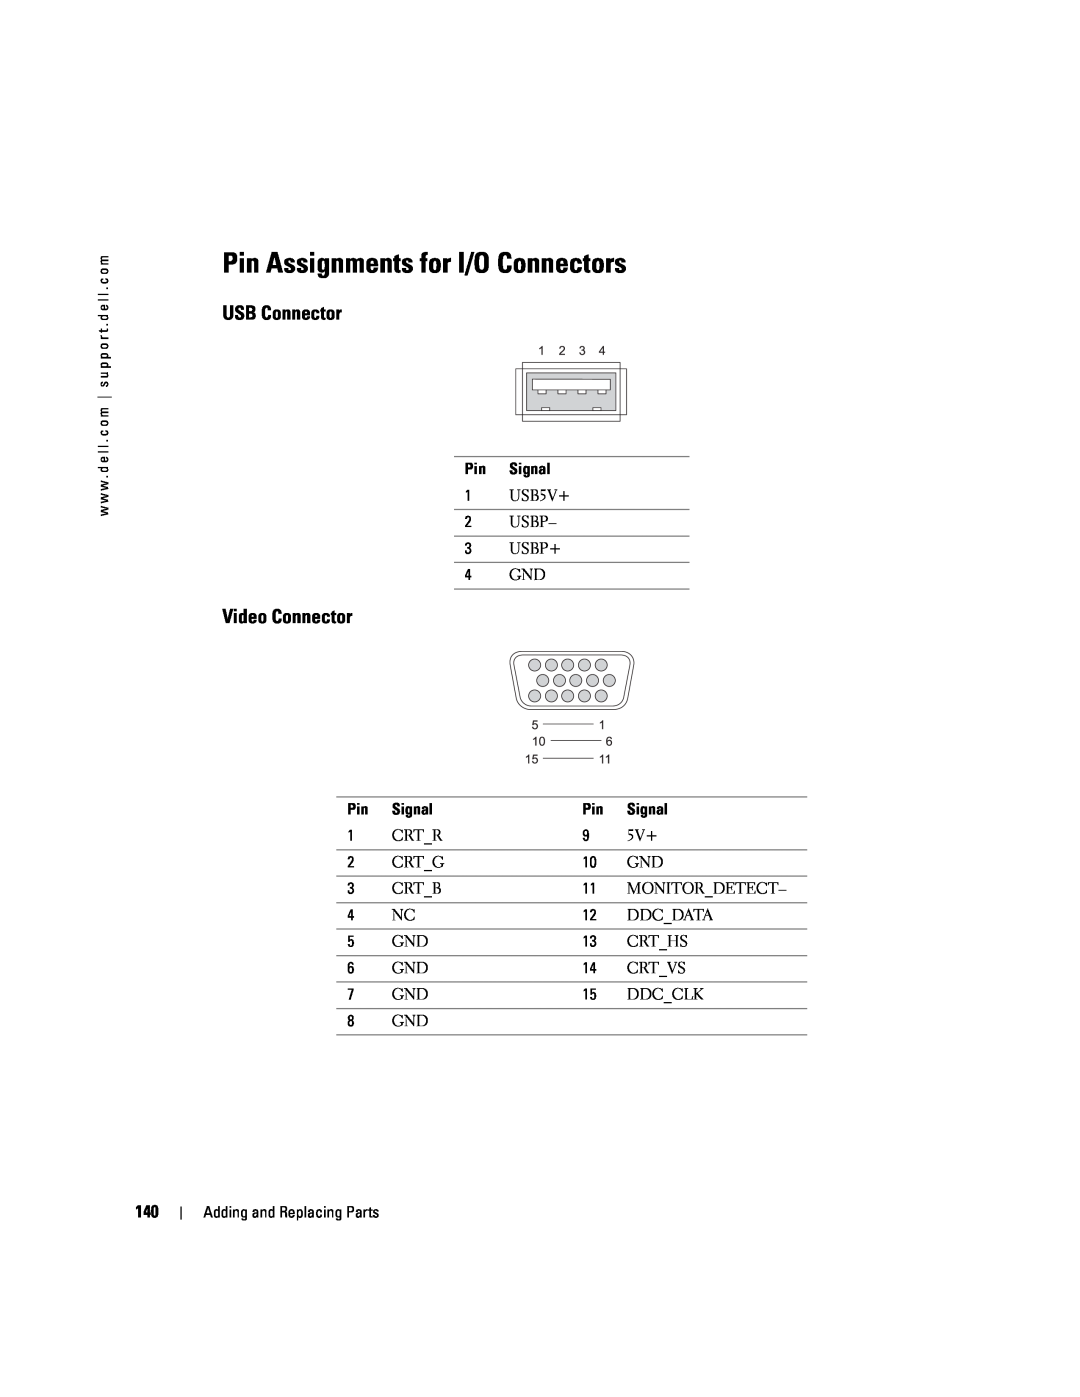 Dell PP09L owner manual Pin Assignments for I/O Connectors, USB Connector, Video Connector 